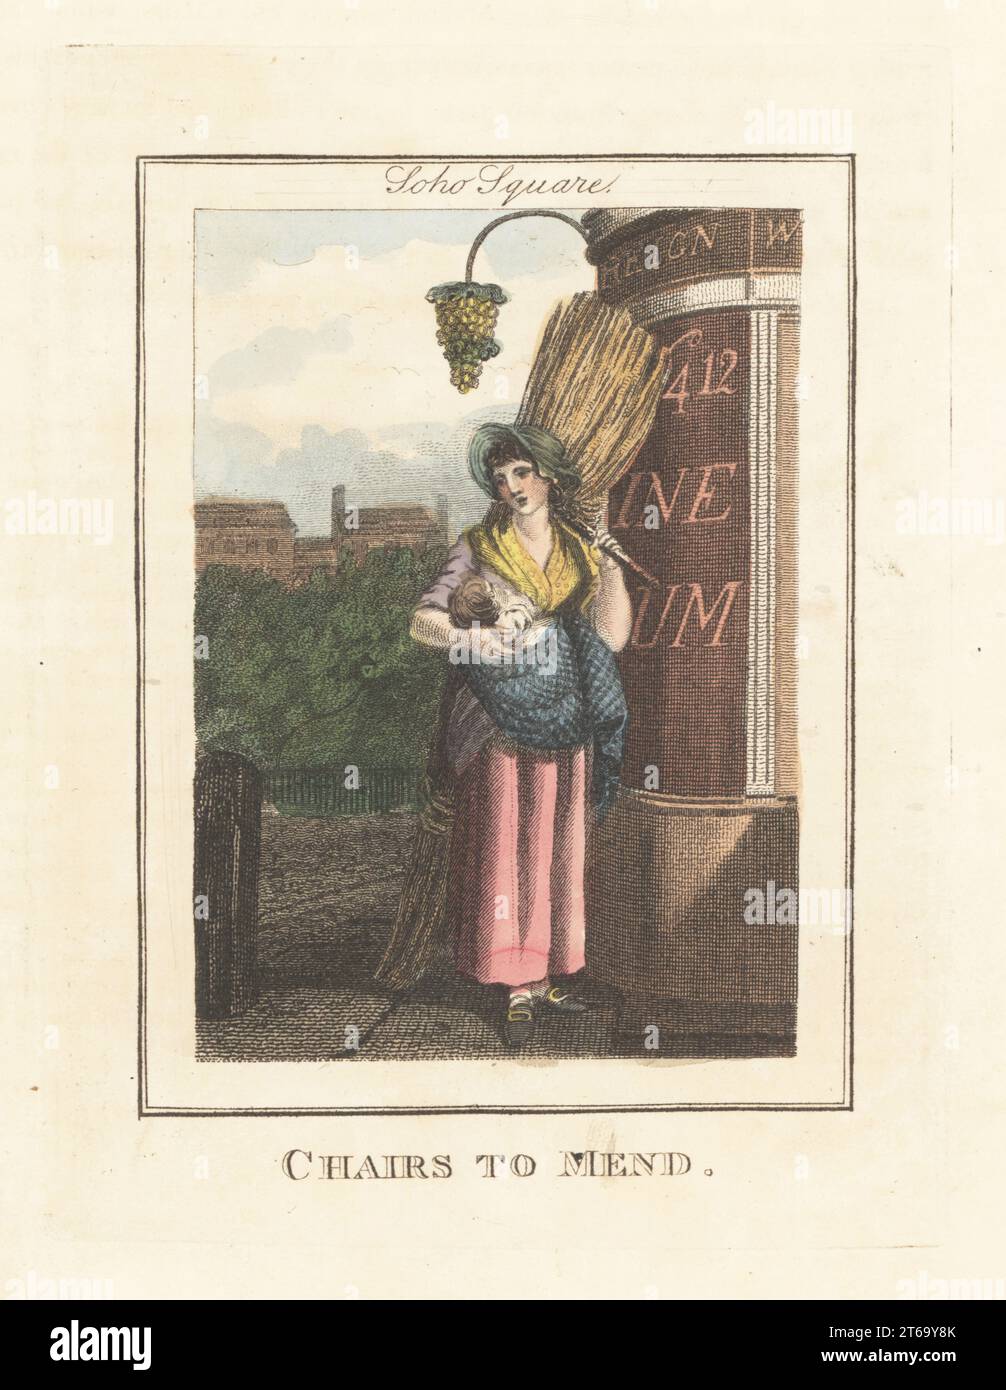 Chair-mender looking for customers in Soho Square, London, 1805. Woman in bonnet nursing a baby with a bundle of rushes on her back. The gardens and cobbled square behind her. Chairs to mend. Handcoloured copperplate engraving by Edward Edwards after an illustration by William Marshall Craig from Description of the Plates Representing the Itinerant Traders of London, Richard Phillips, No. 71 St Pauls Churchyard, London, 1805. Stock Photo